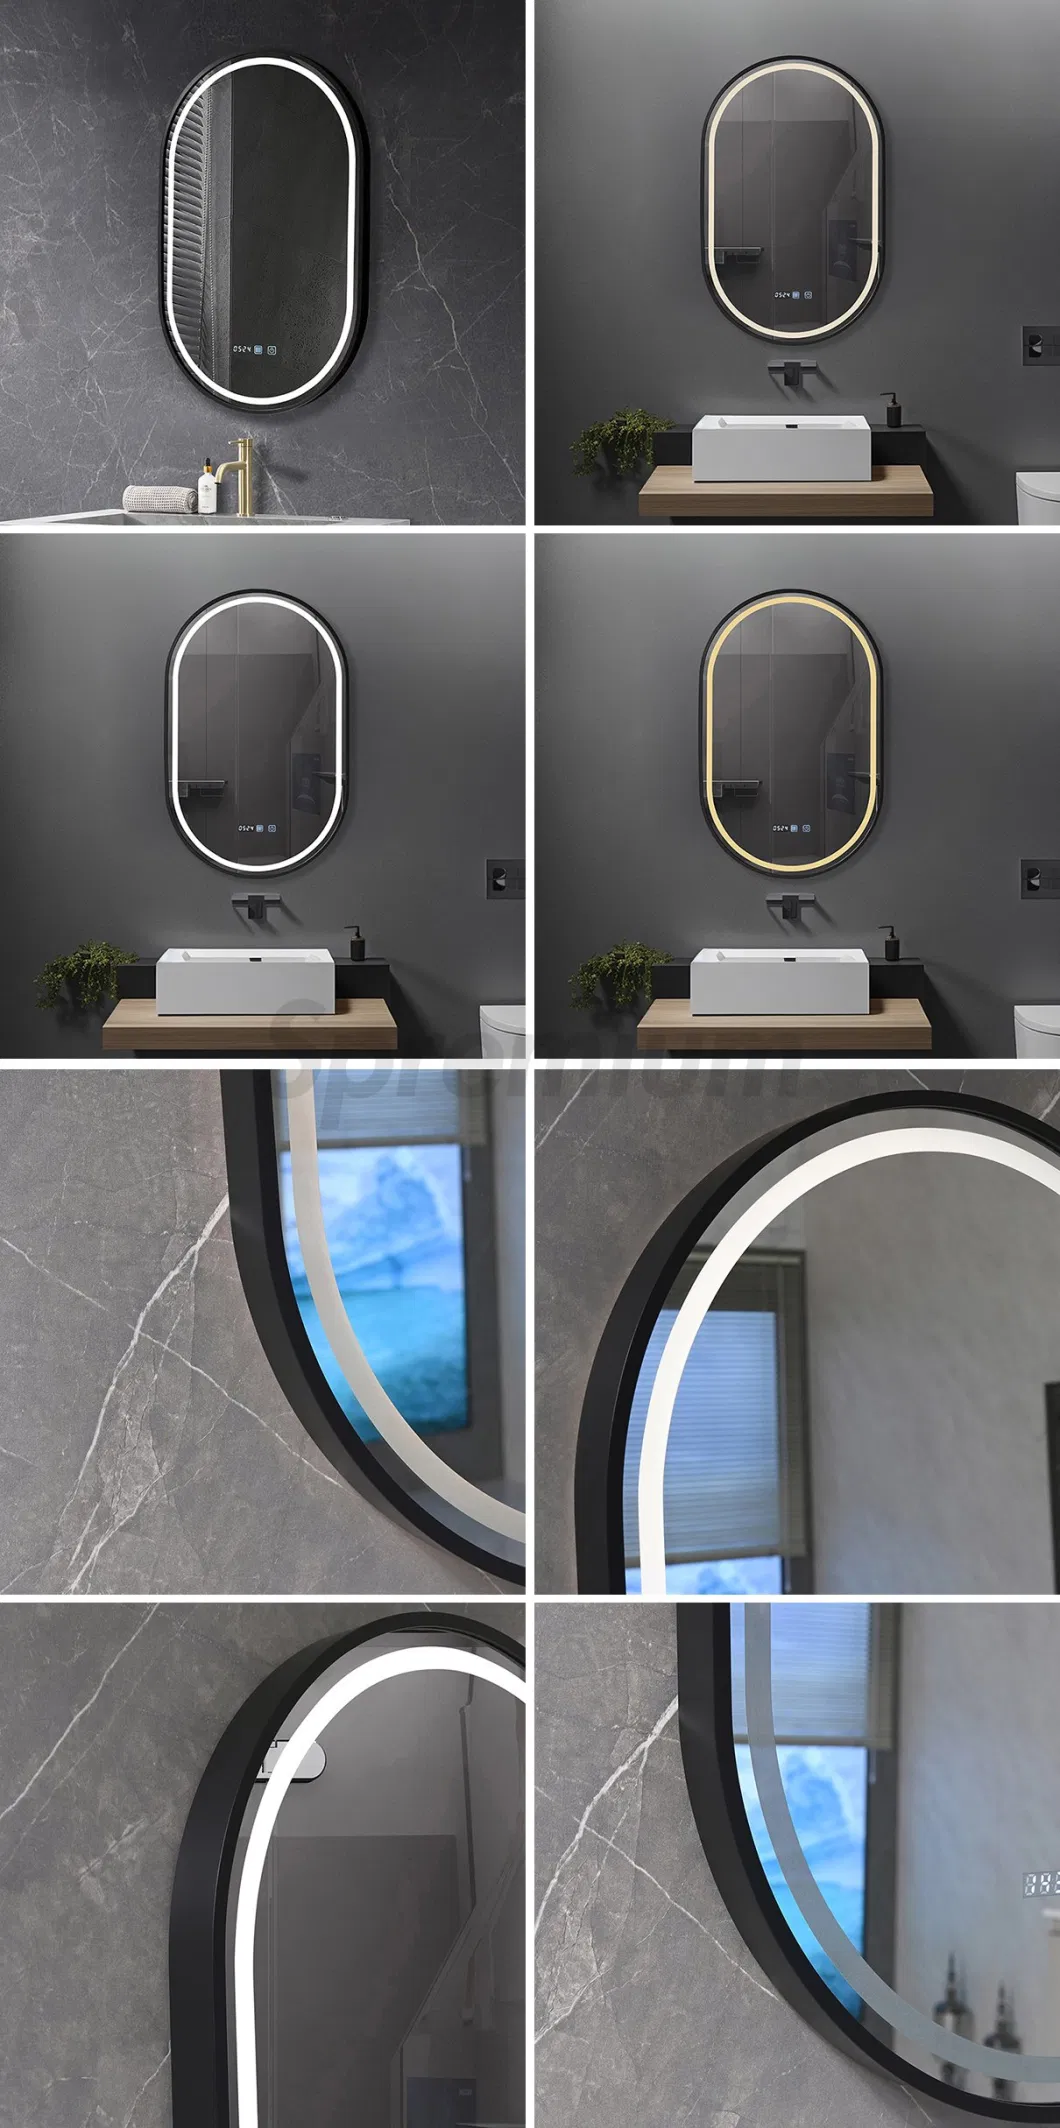 Oval Shape Glass Mirror for Wall Decorative Oval Hair Salon Metal Frame Screen Smart Mirrors for Bathroom with LED Light